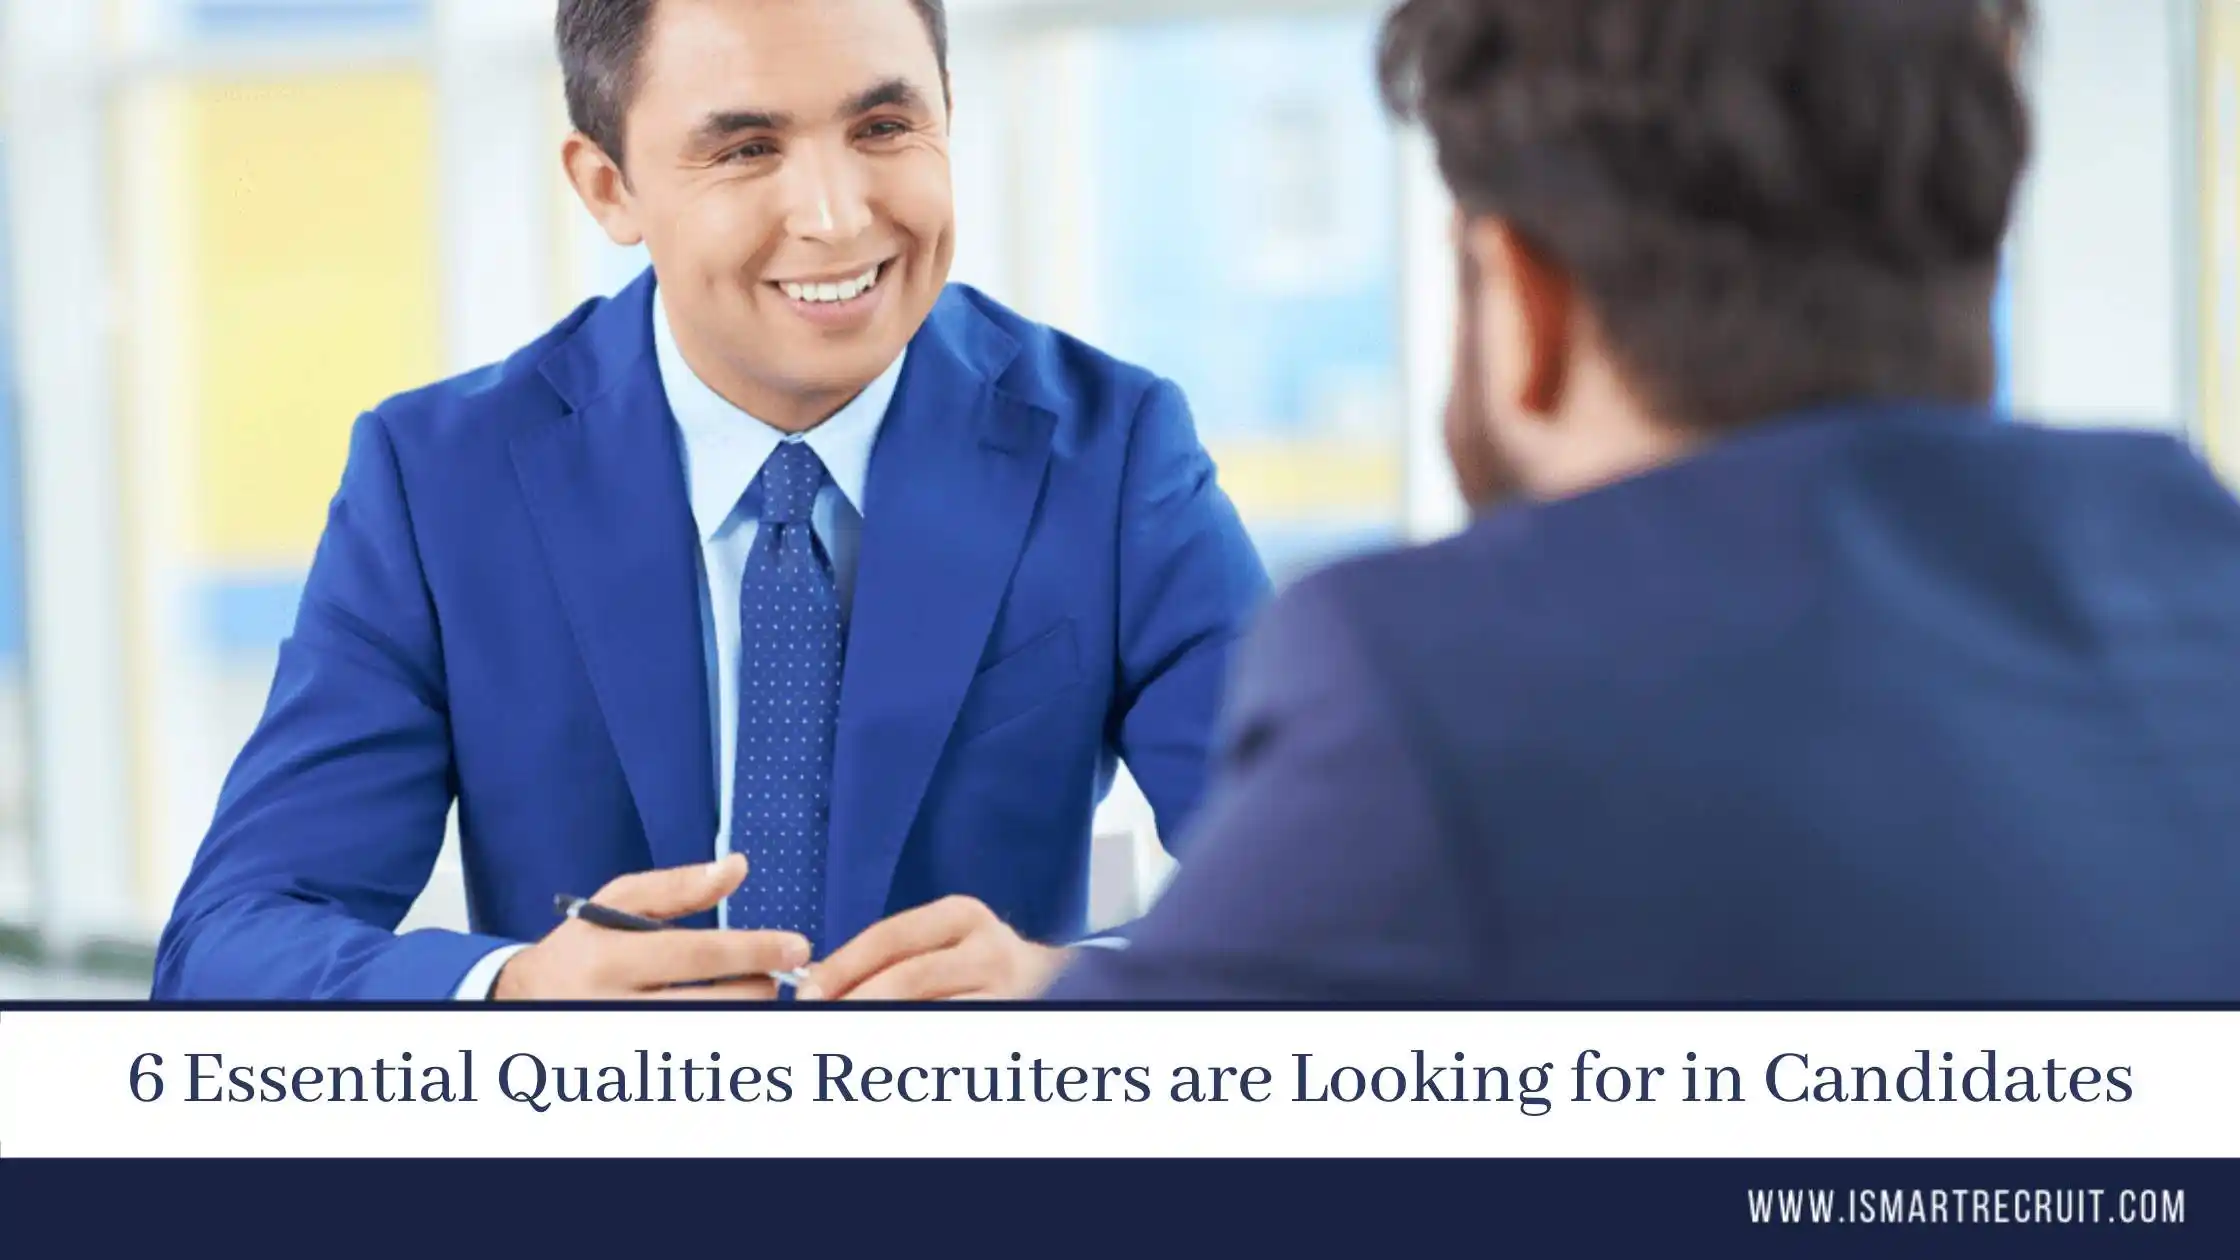 6 Essential Qualities Recruiters are Looking for in Candidates